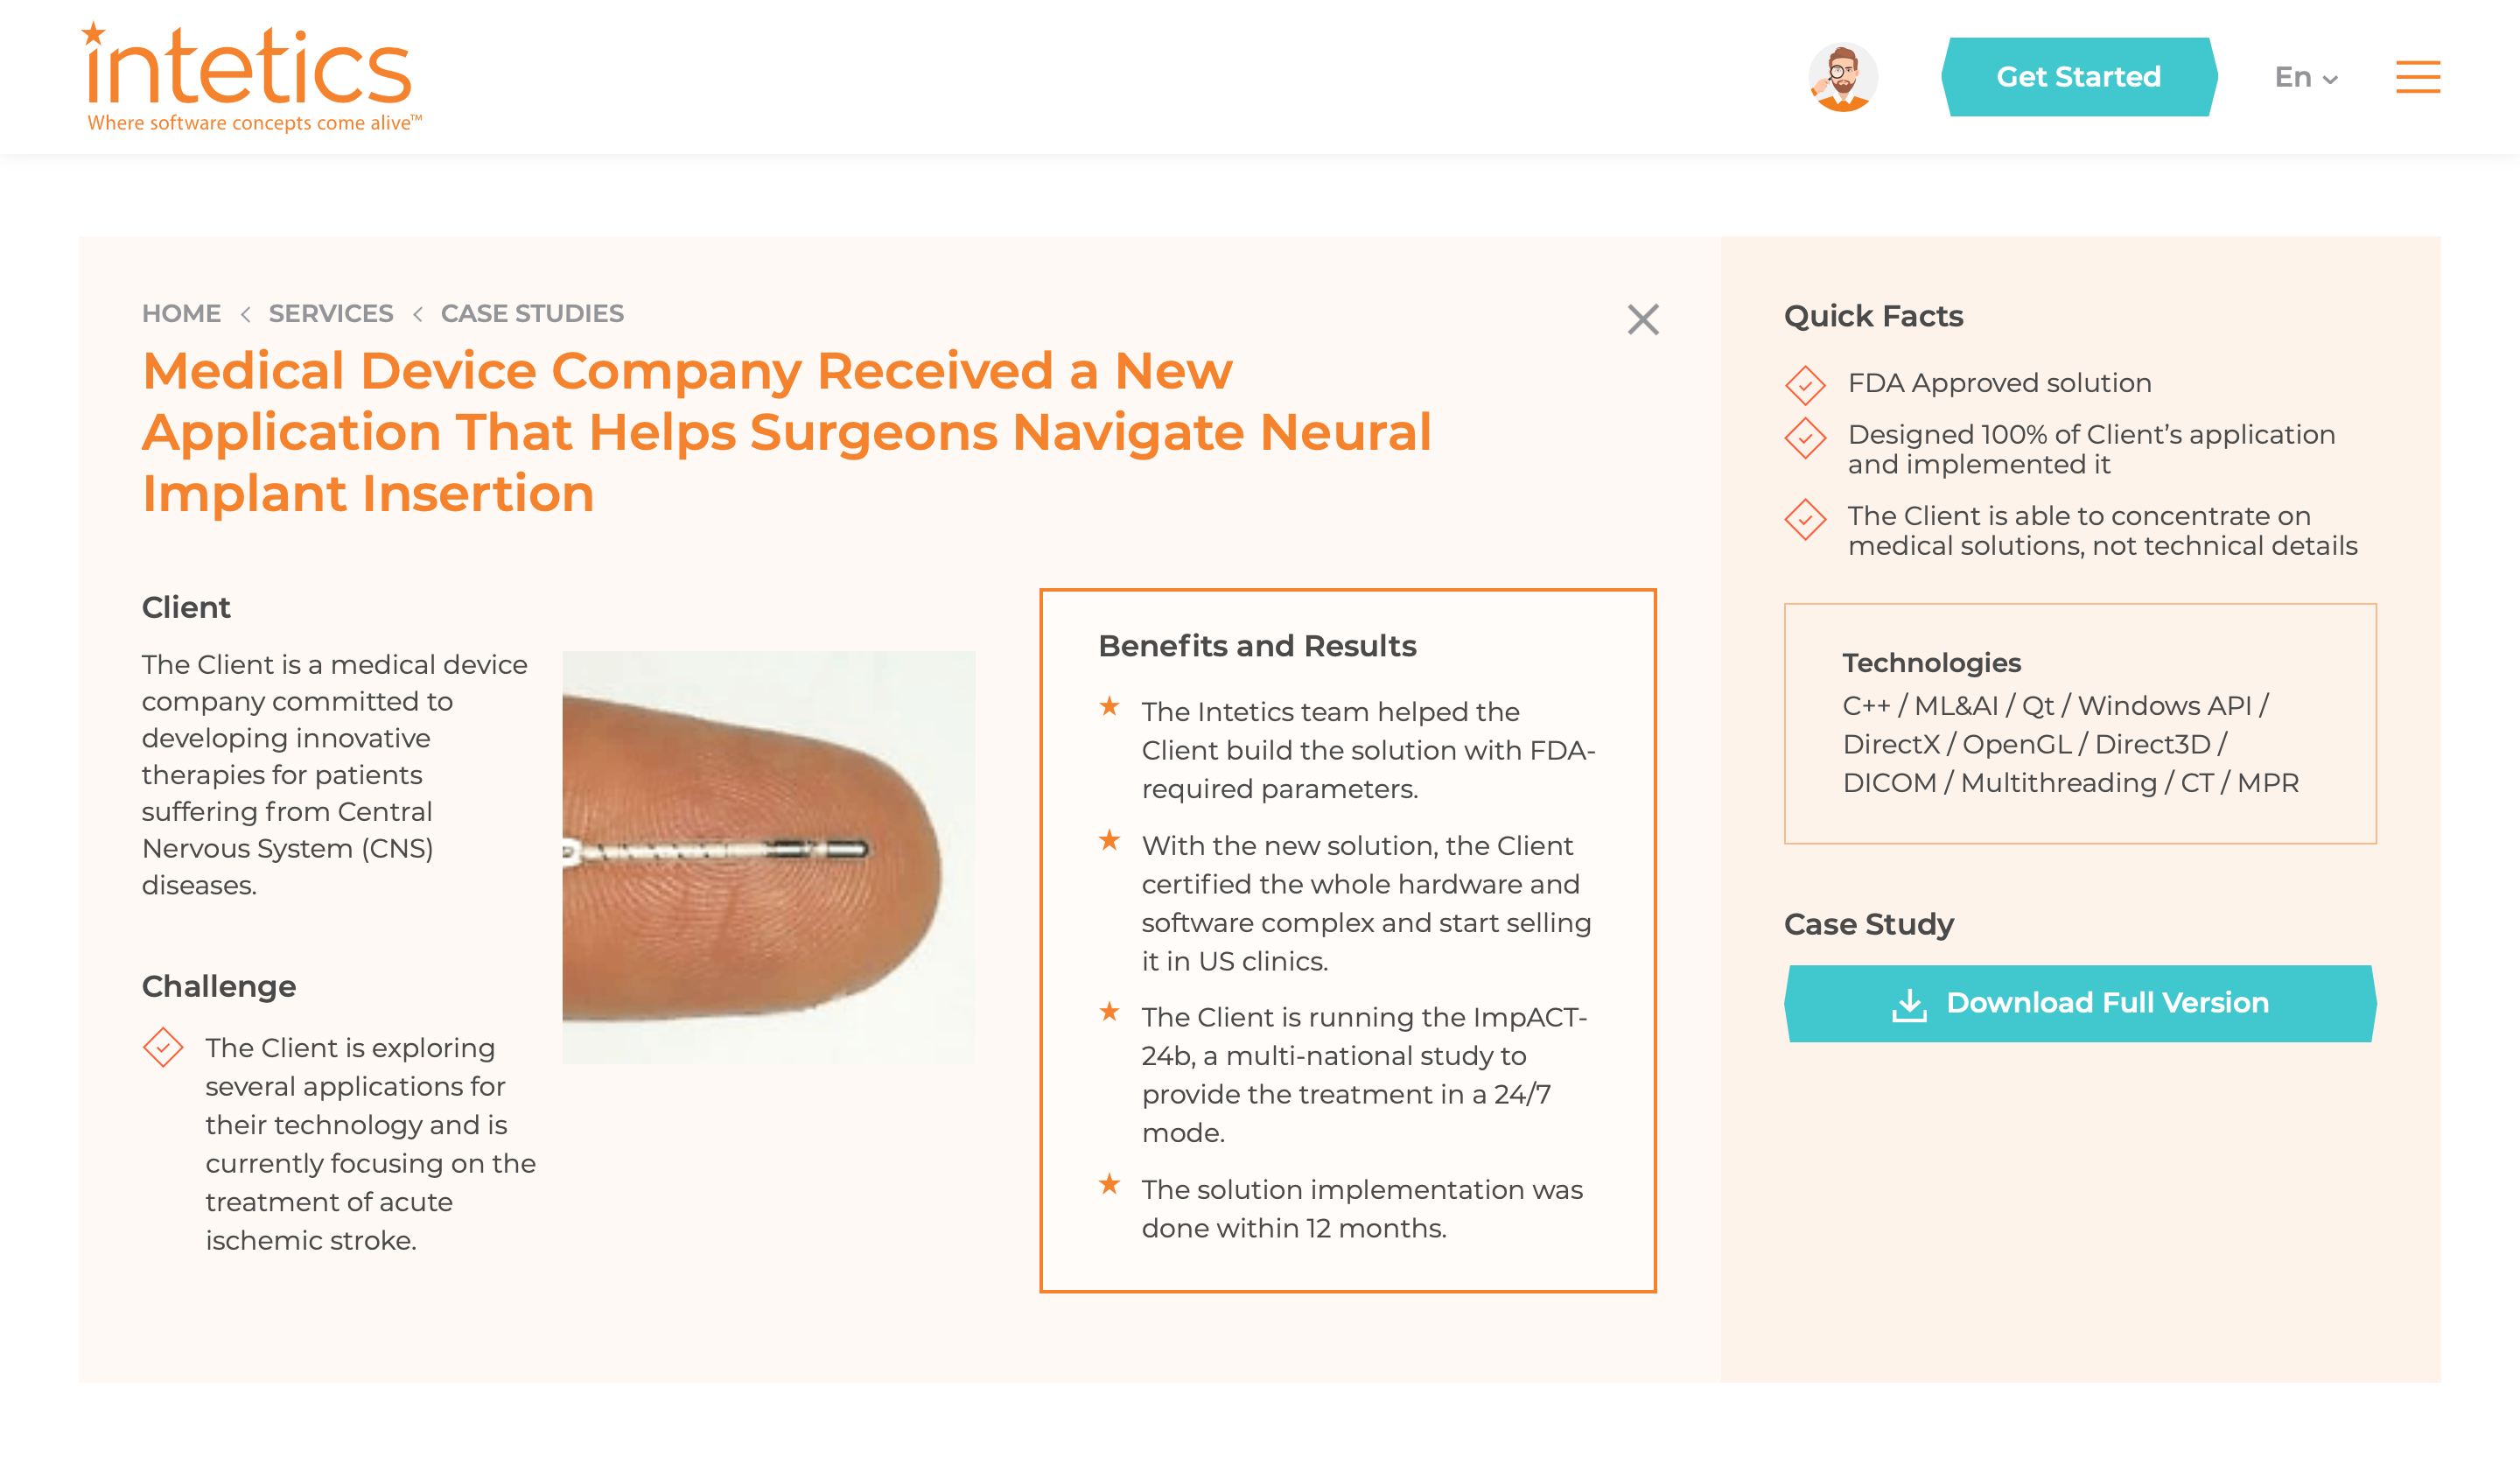 Medical Device Company Received a New Application That Helps Surgeons Navigate Neural Implant Insertion 